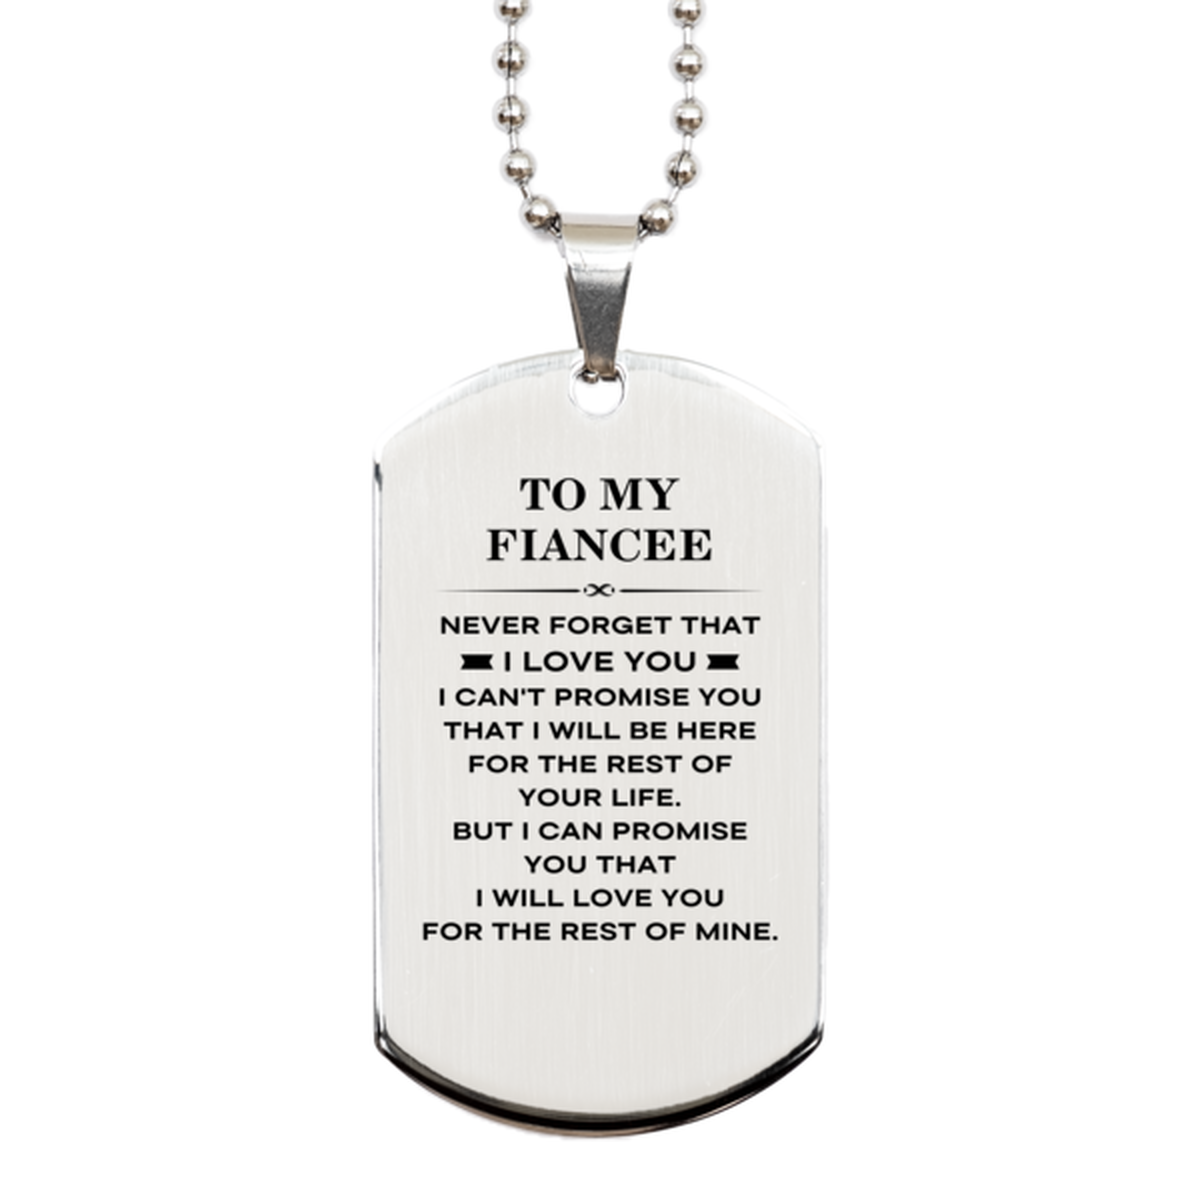 To My Fiancee Gifts, I will love you for the rest of mine, Love Fiancee Dog Tag Necklace, Birthday Christmas Unique Silver Dog Tag For Fiancee